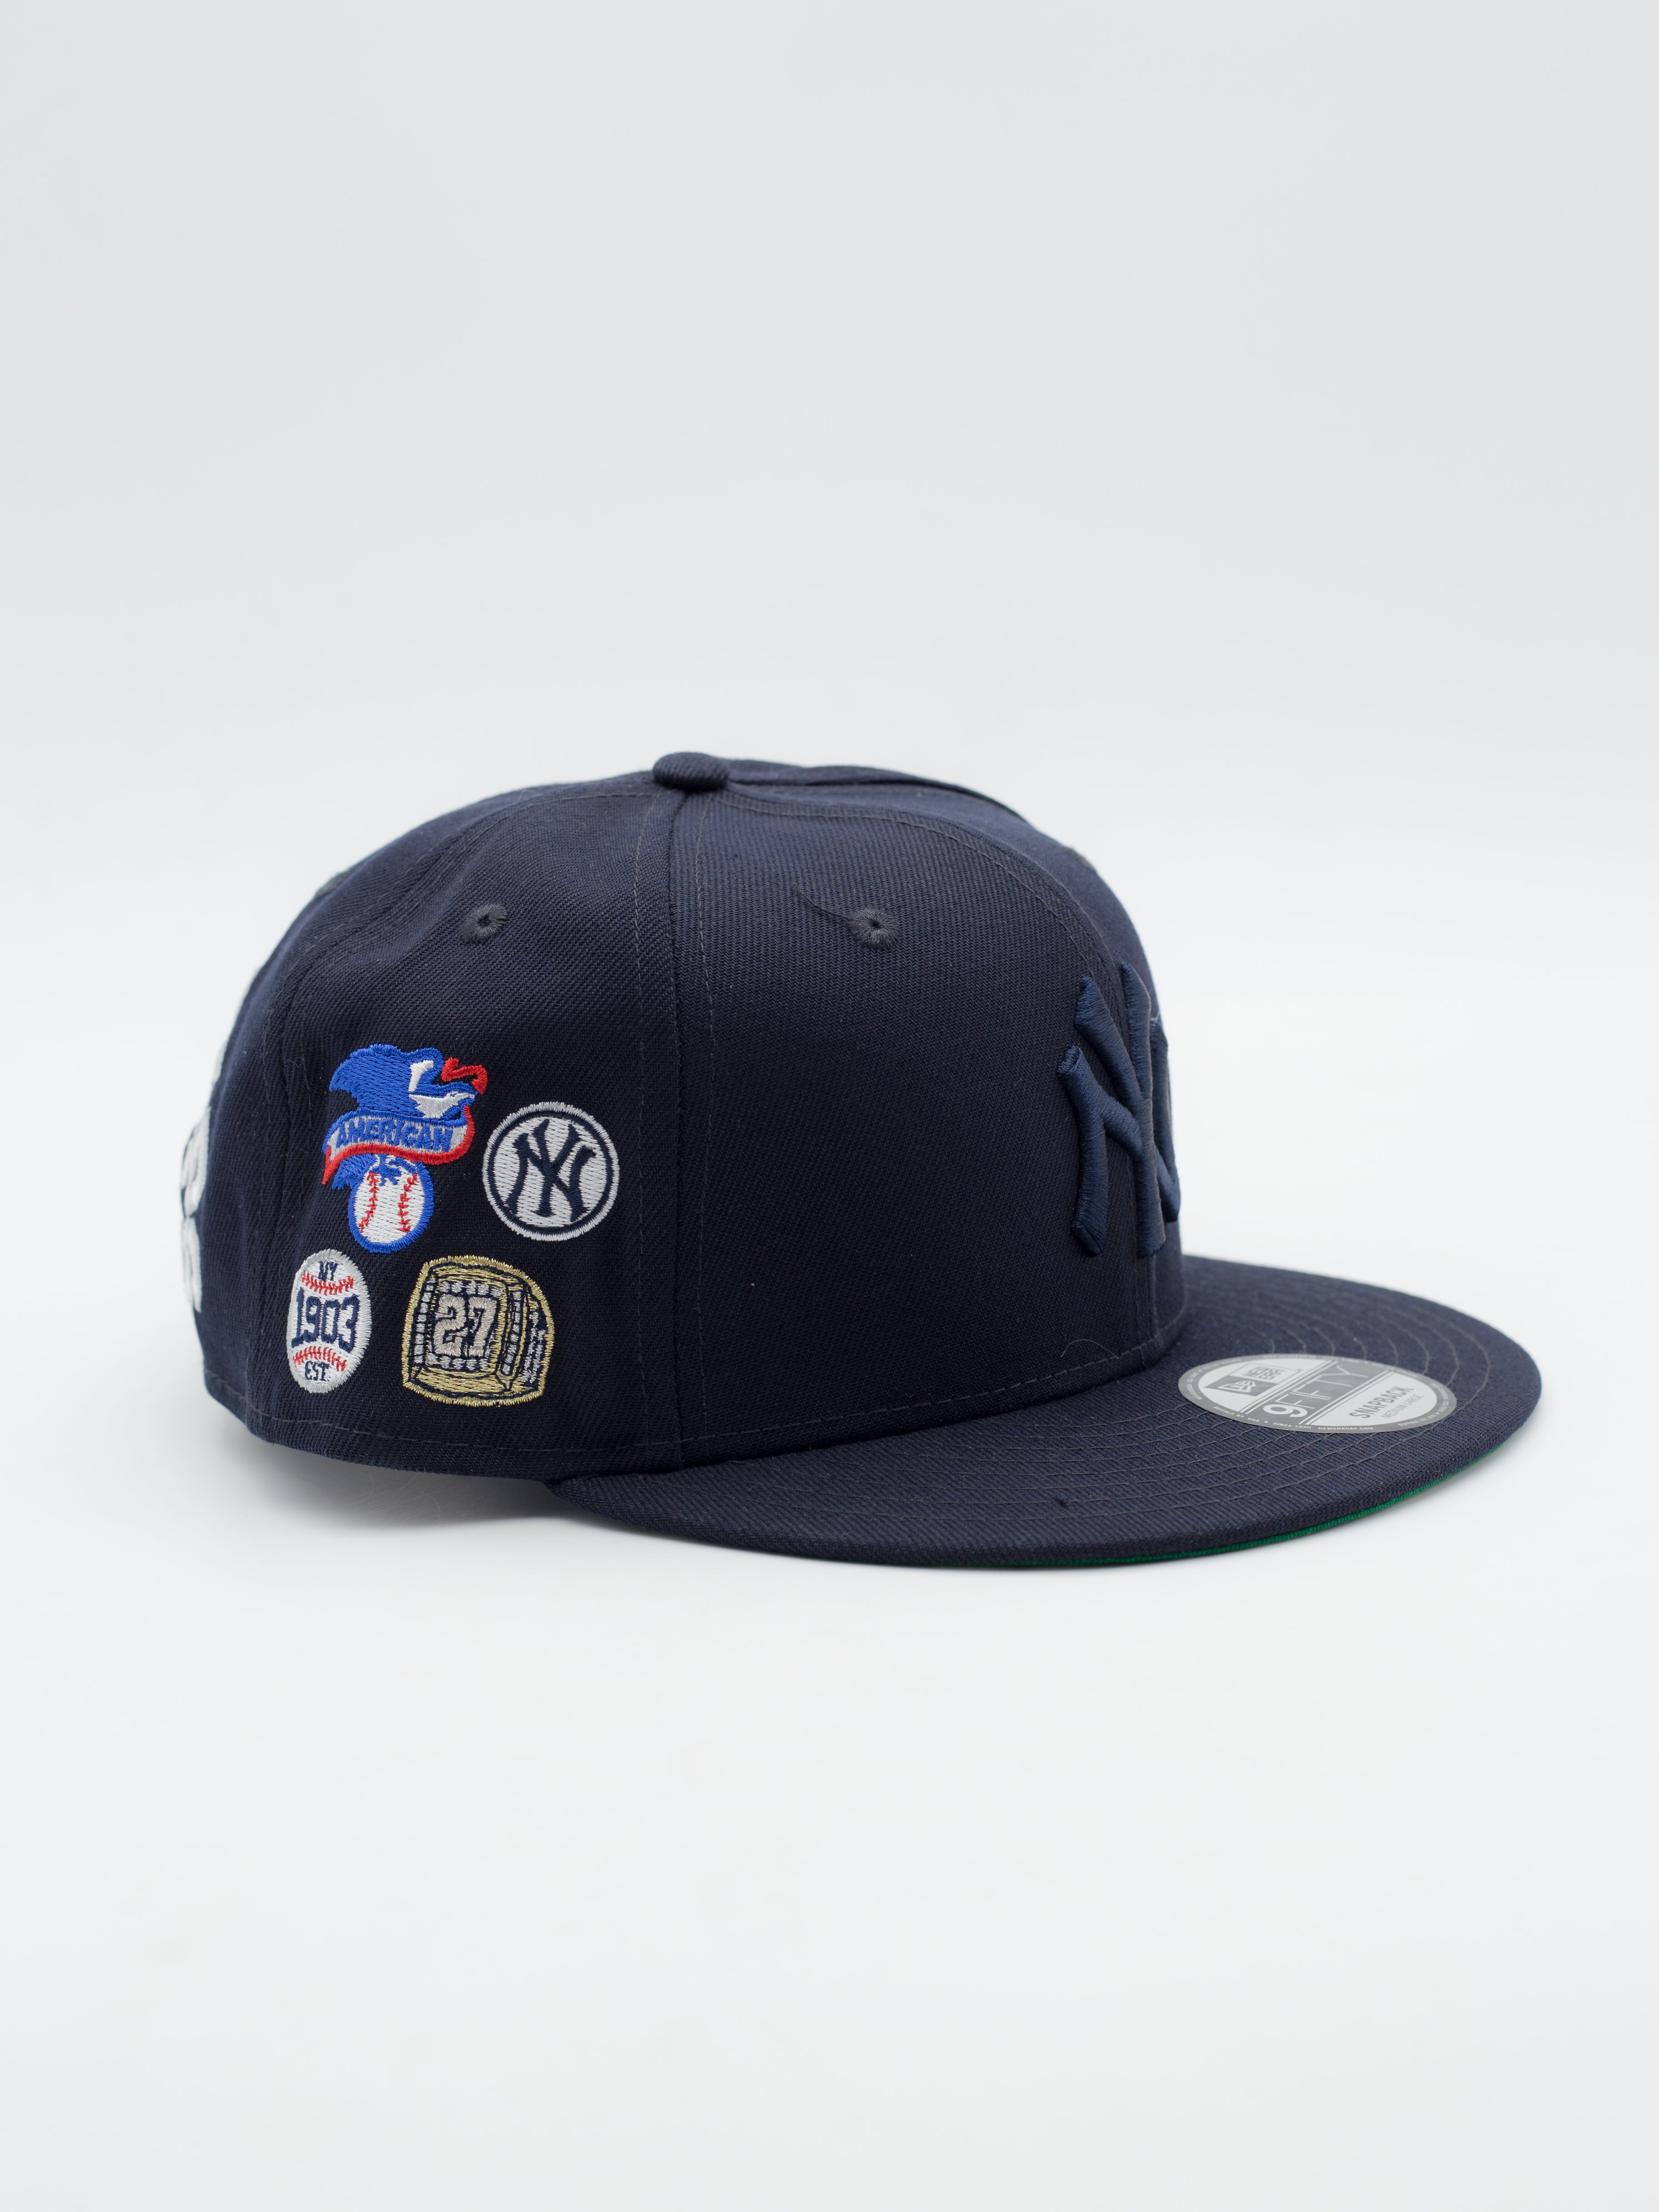 9FIFTY New York Yankees League Champions Navy